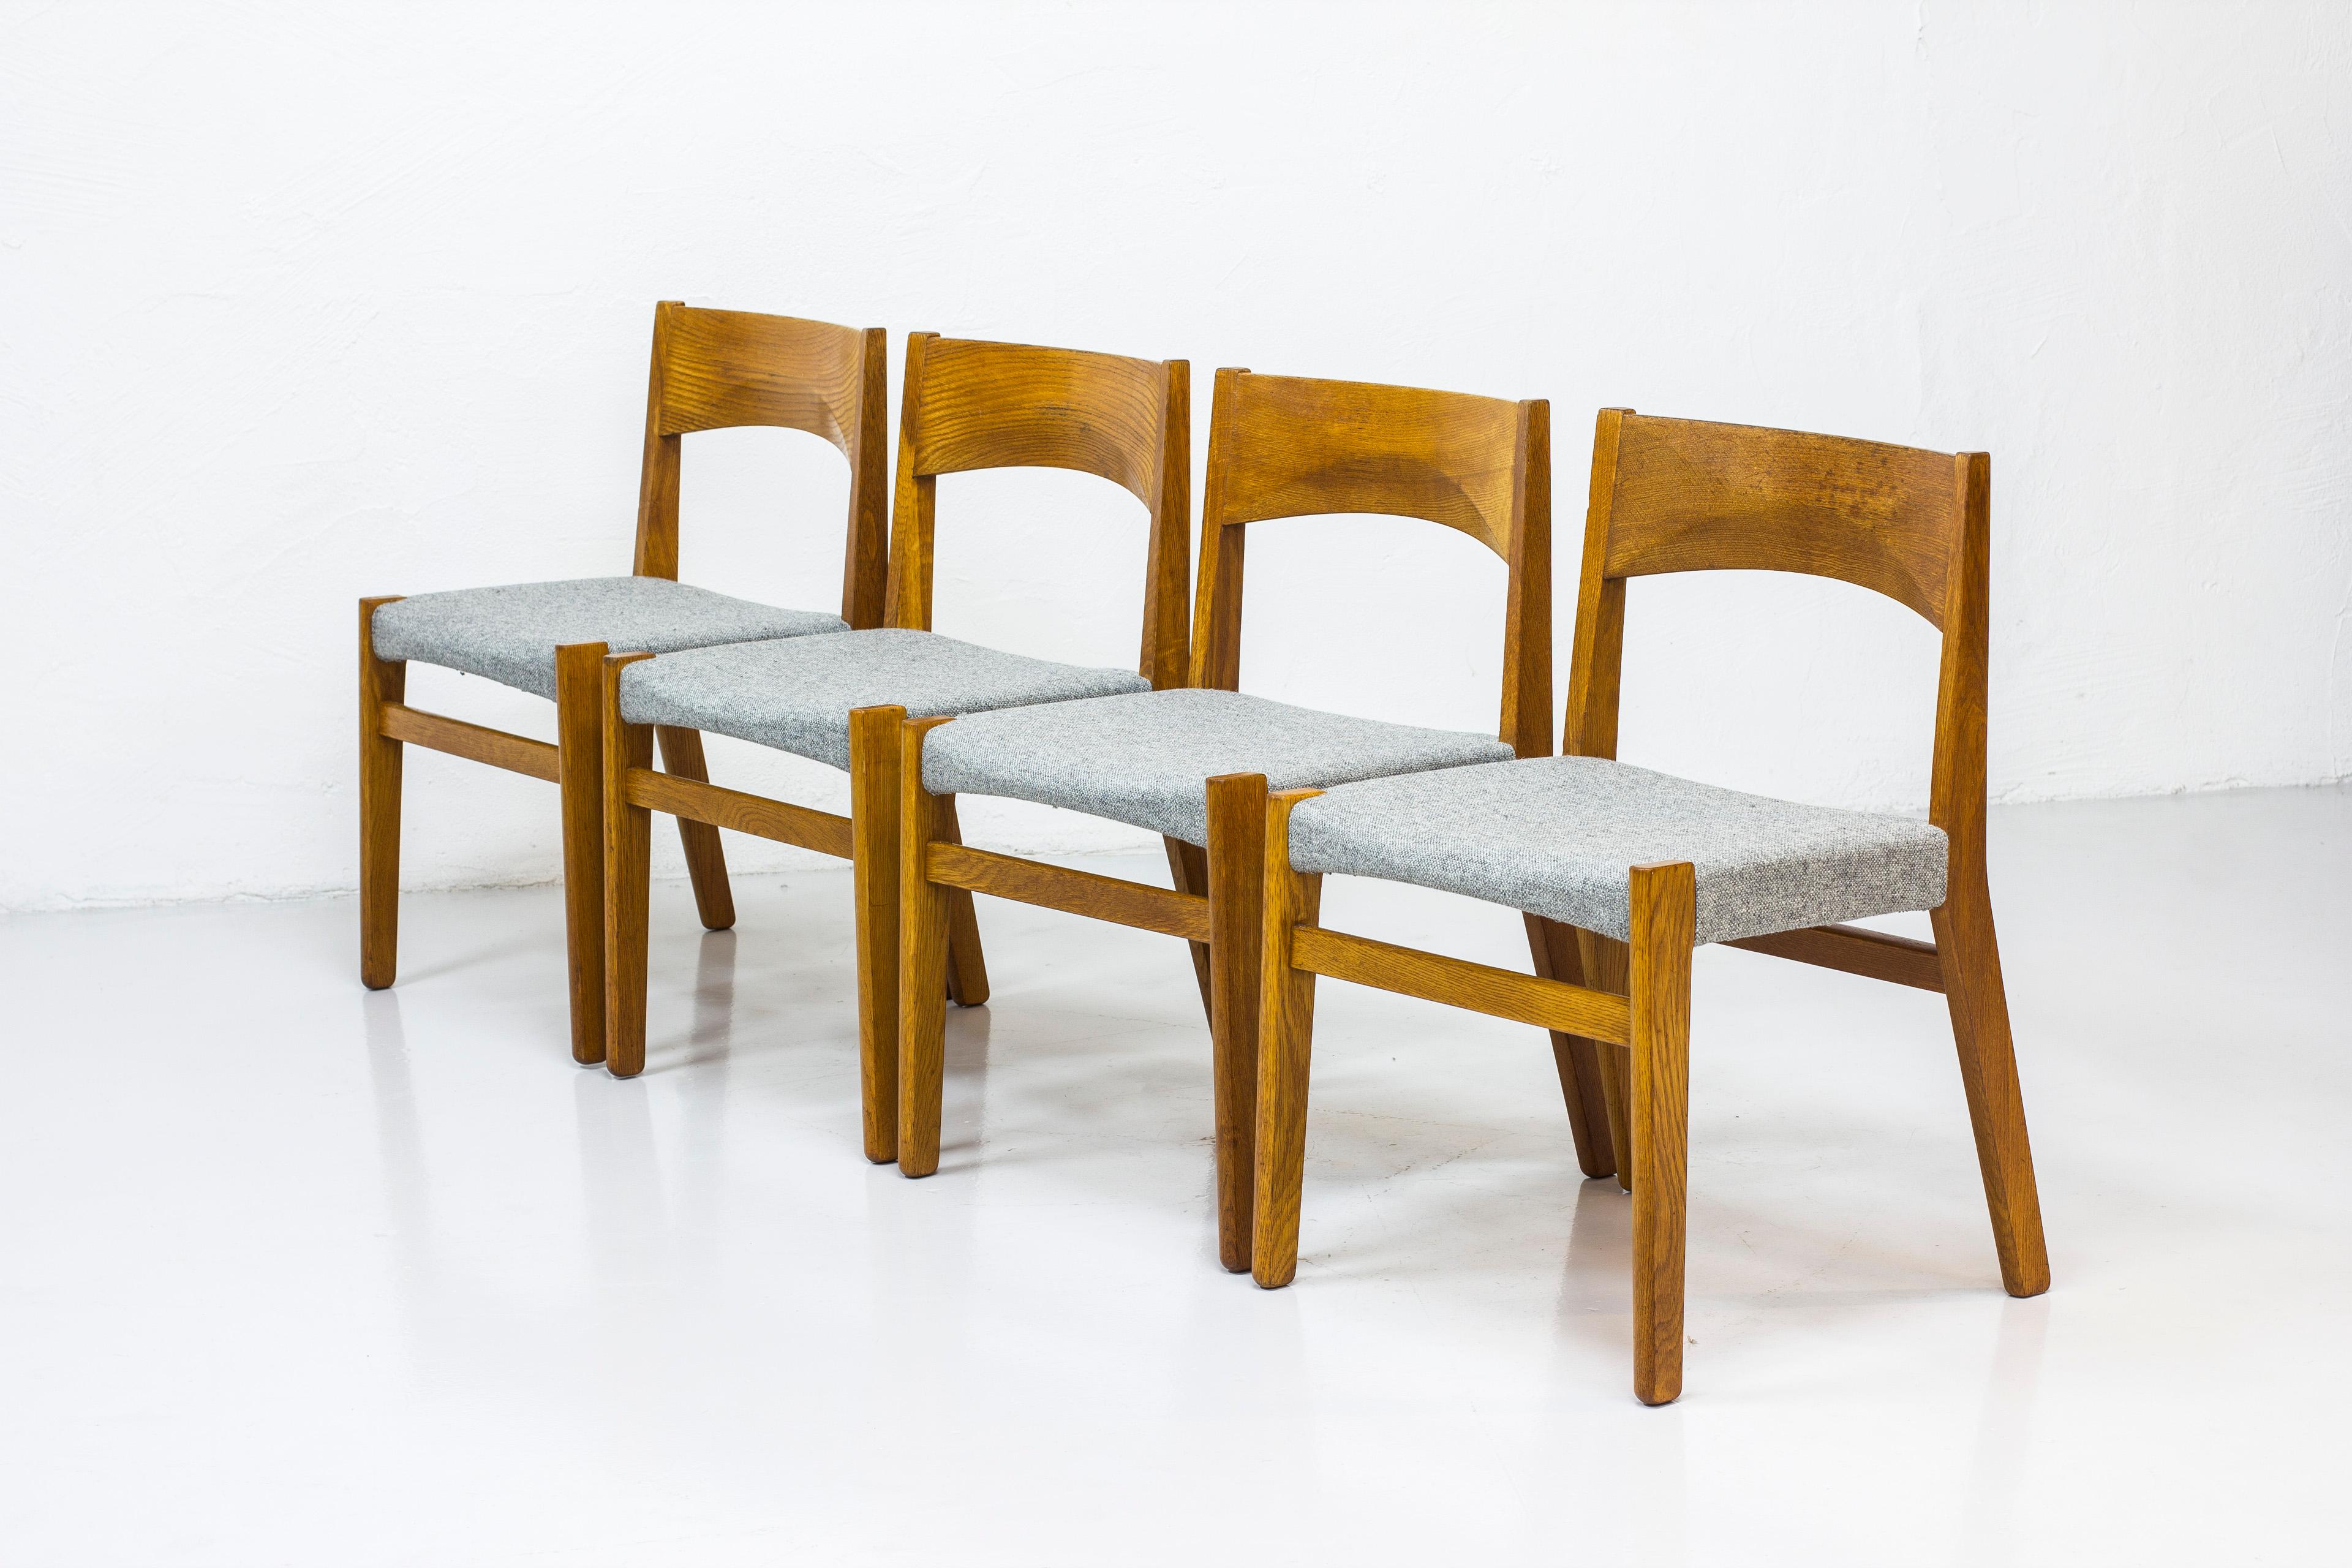 Danish Dining chairs by John Vedel Rieper for Erhard Rasmussen, Denmark, circa 1957 For Sale